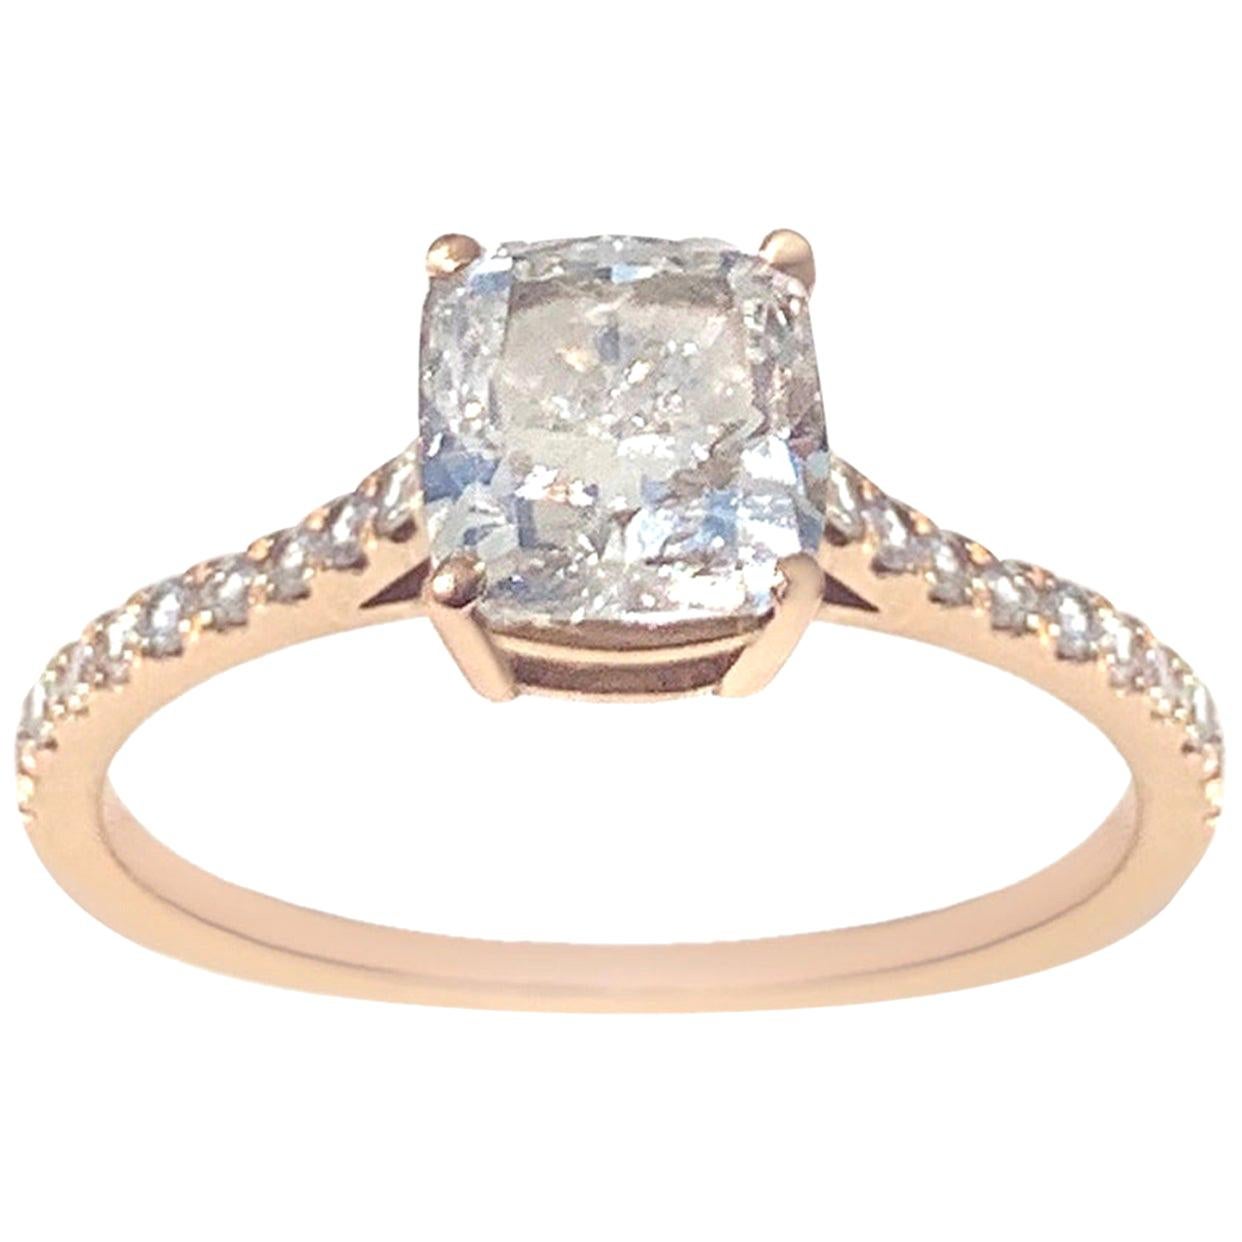 For Sale:  GIA Certified 1.74 Carat Cushion Cut Diamond Engagement Ring